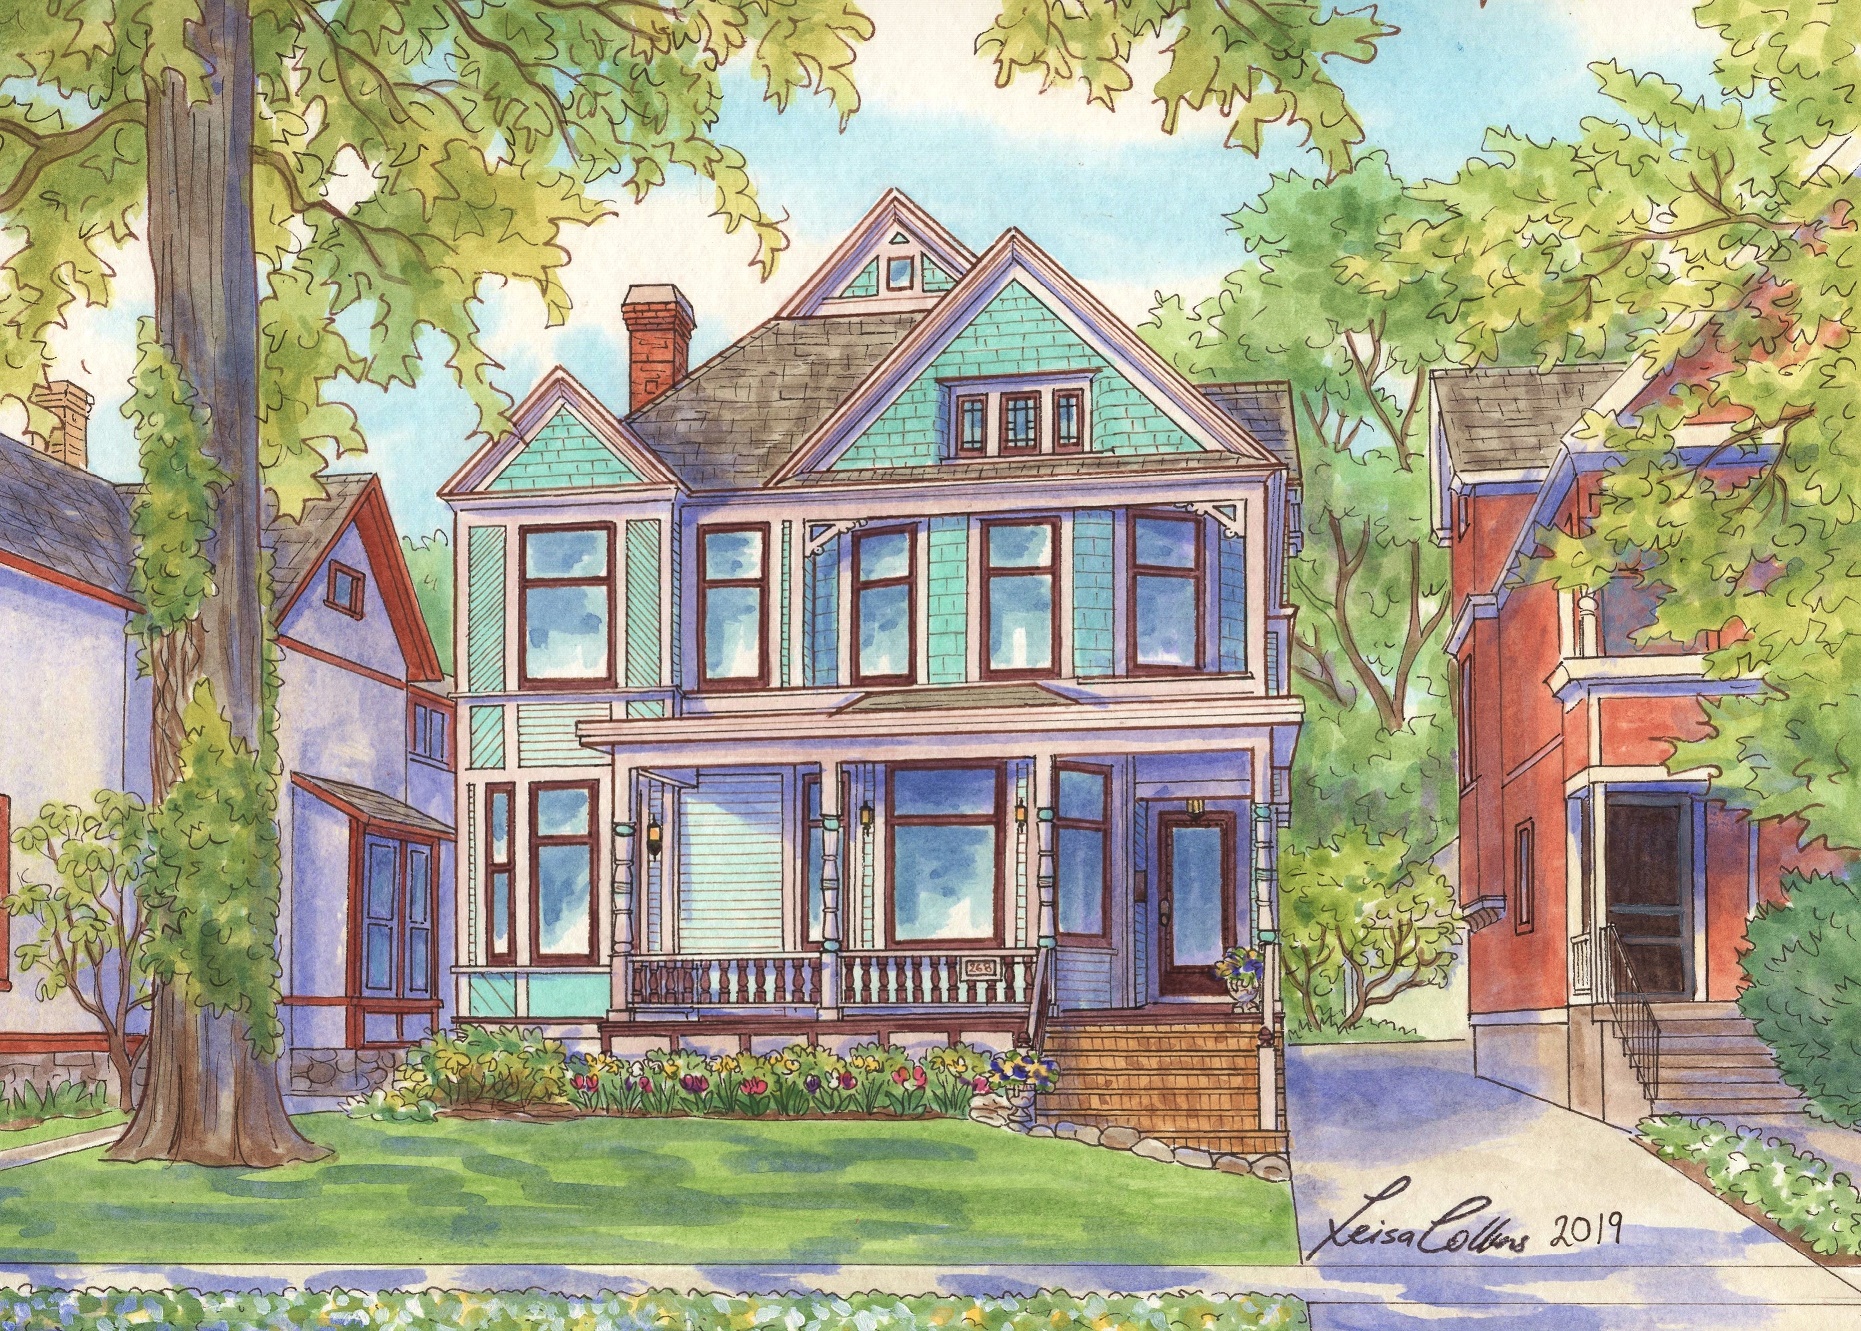 The original Heritage Hill House Portrait painting - in the spring!